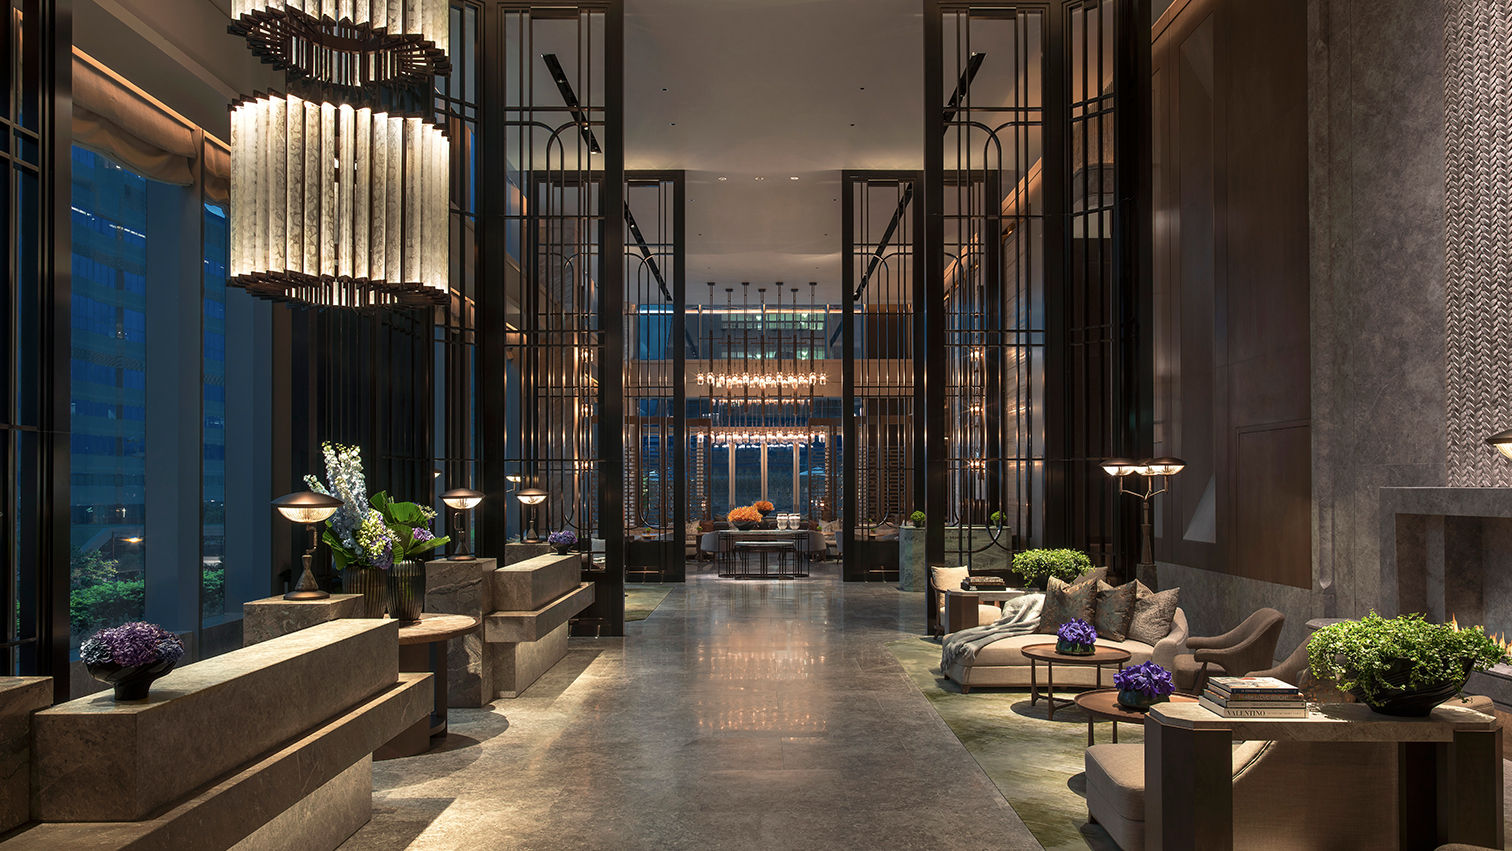 Suite Staycation: St. Regis Hong Kong offers a refined taste of the city for food and design lovers